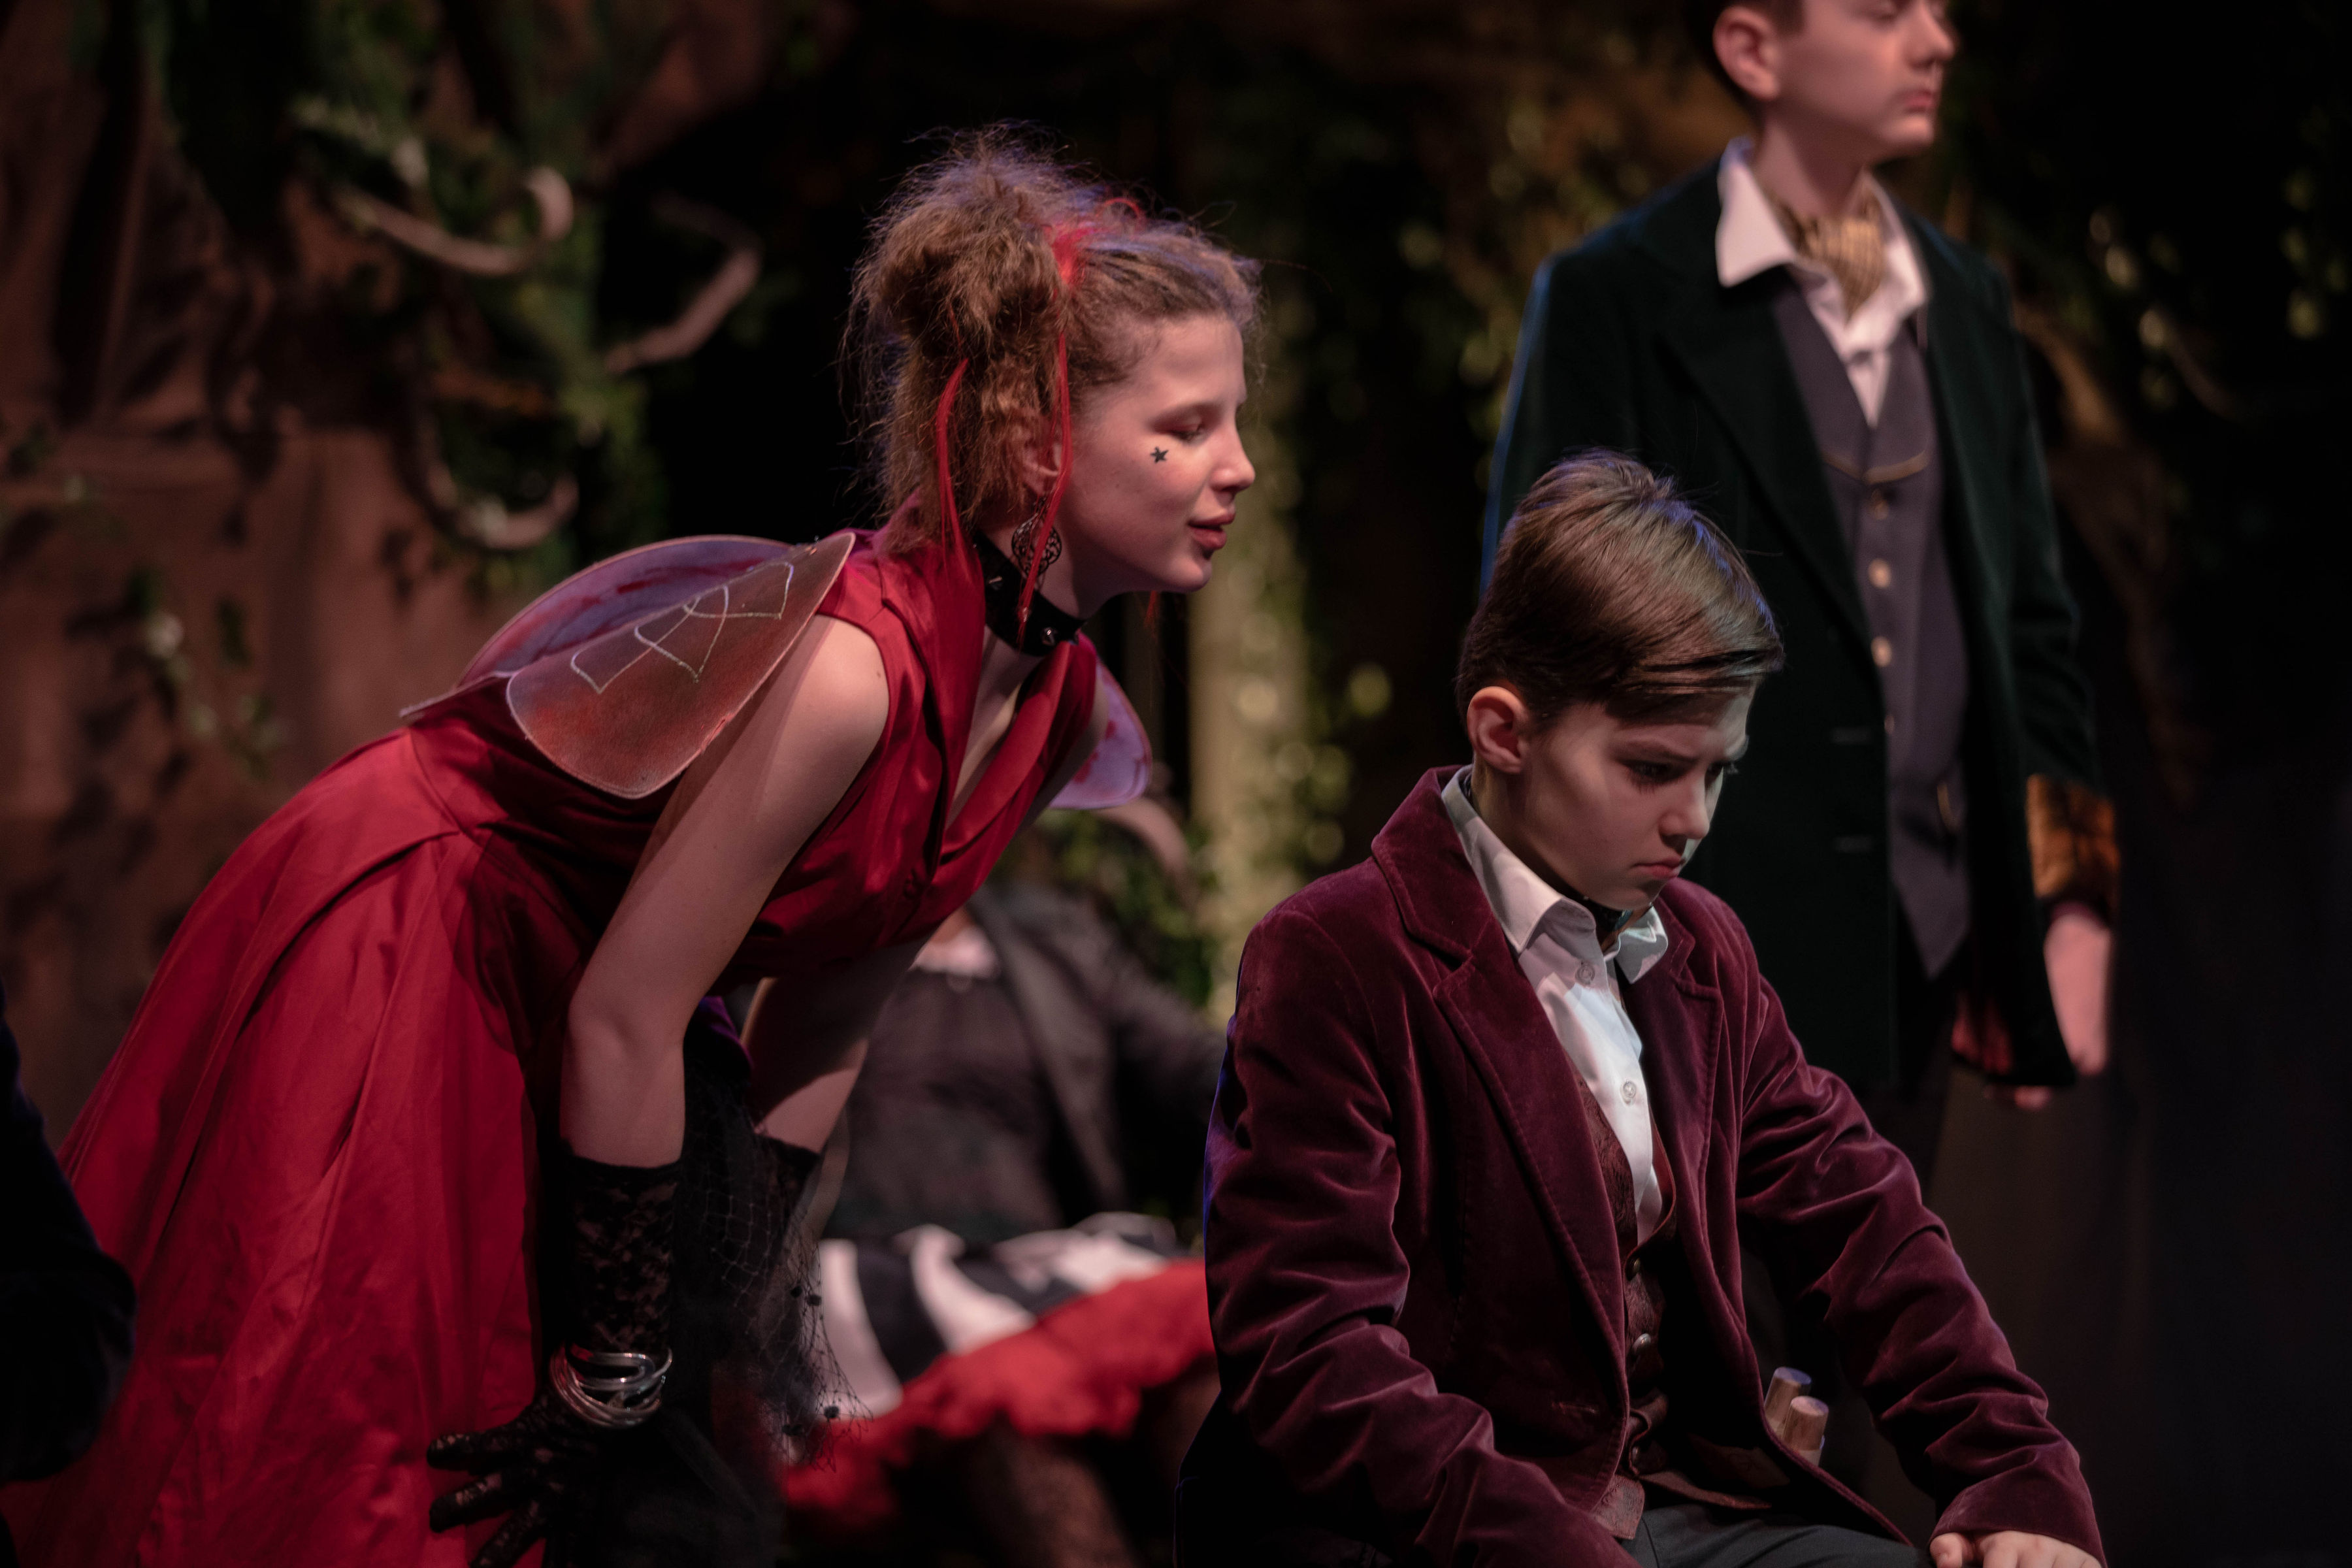 Years 7 and 8 Production of A Midsummer Night's Dream - 11 and 13 February 2020